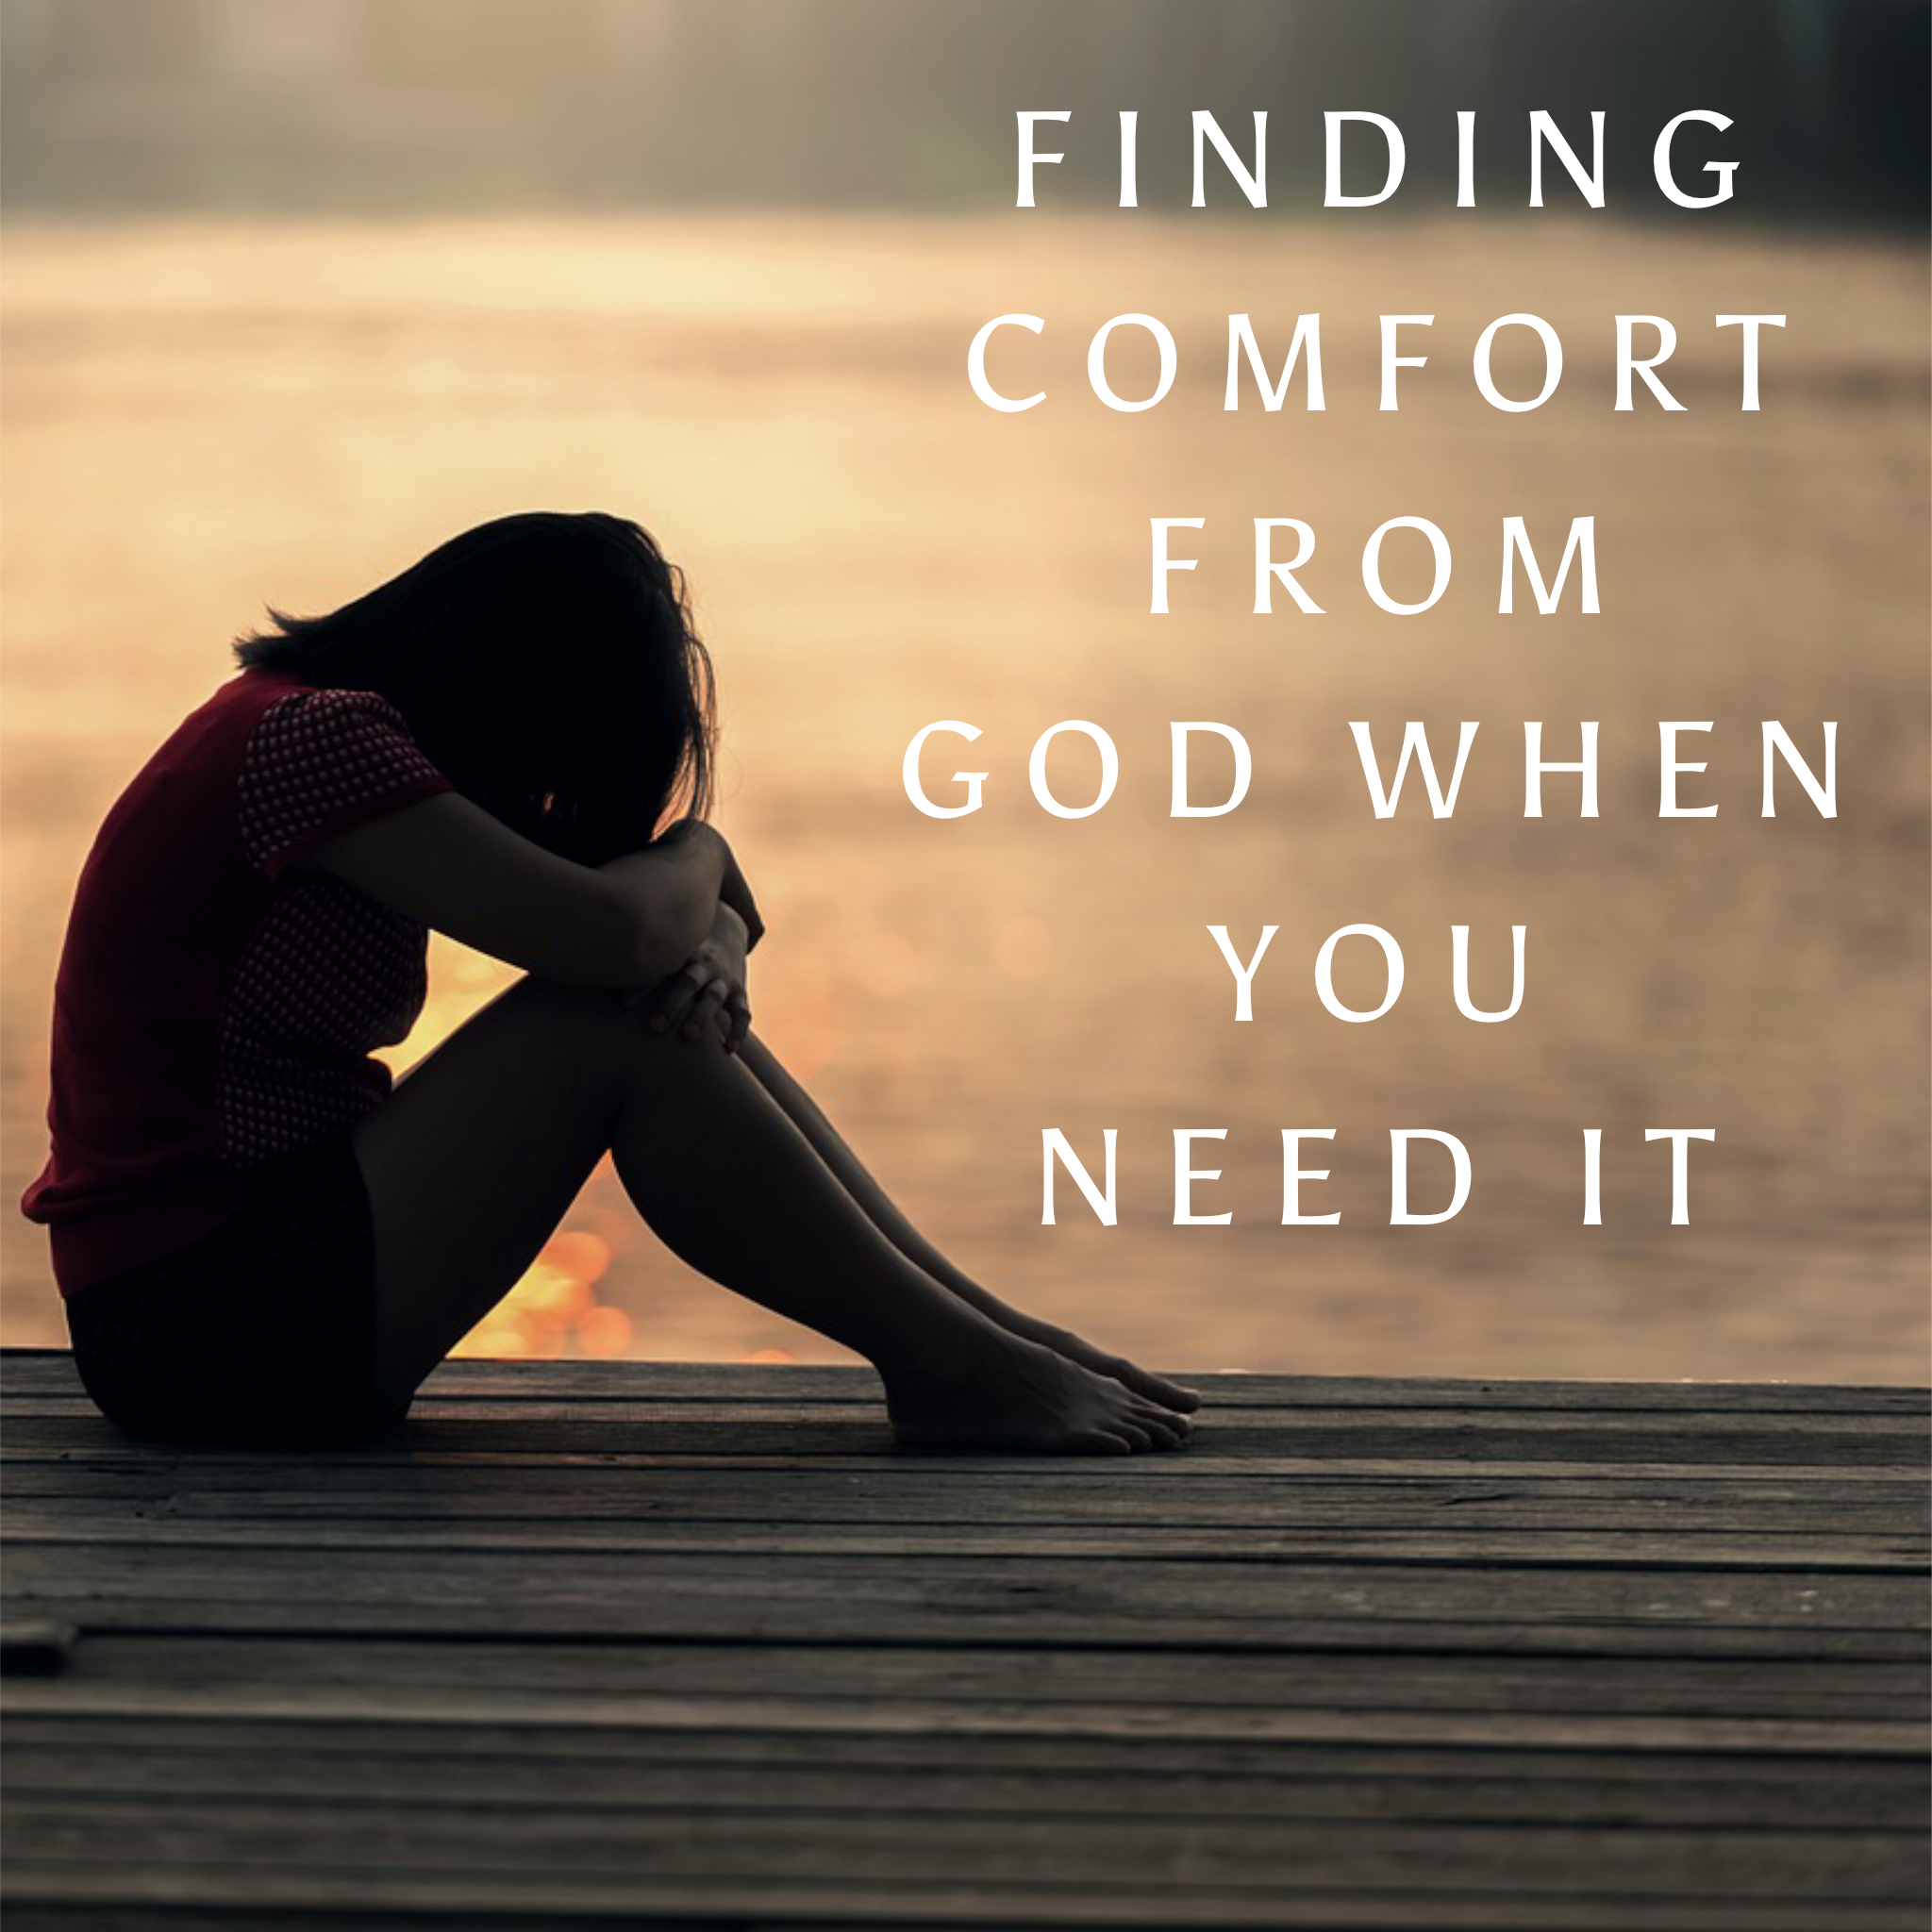 Finding Comfort from God when You Need It - 11/20/22